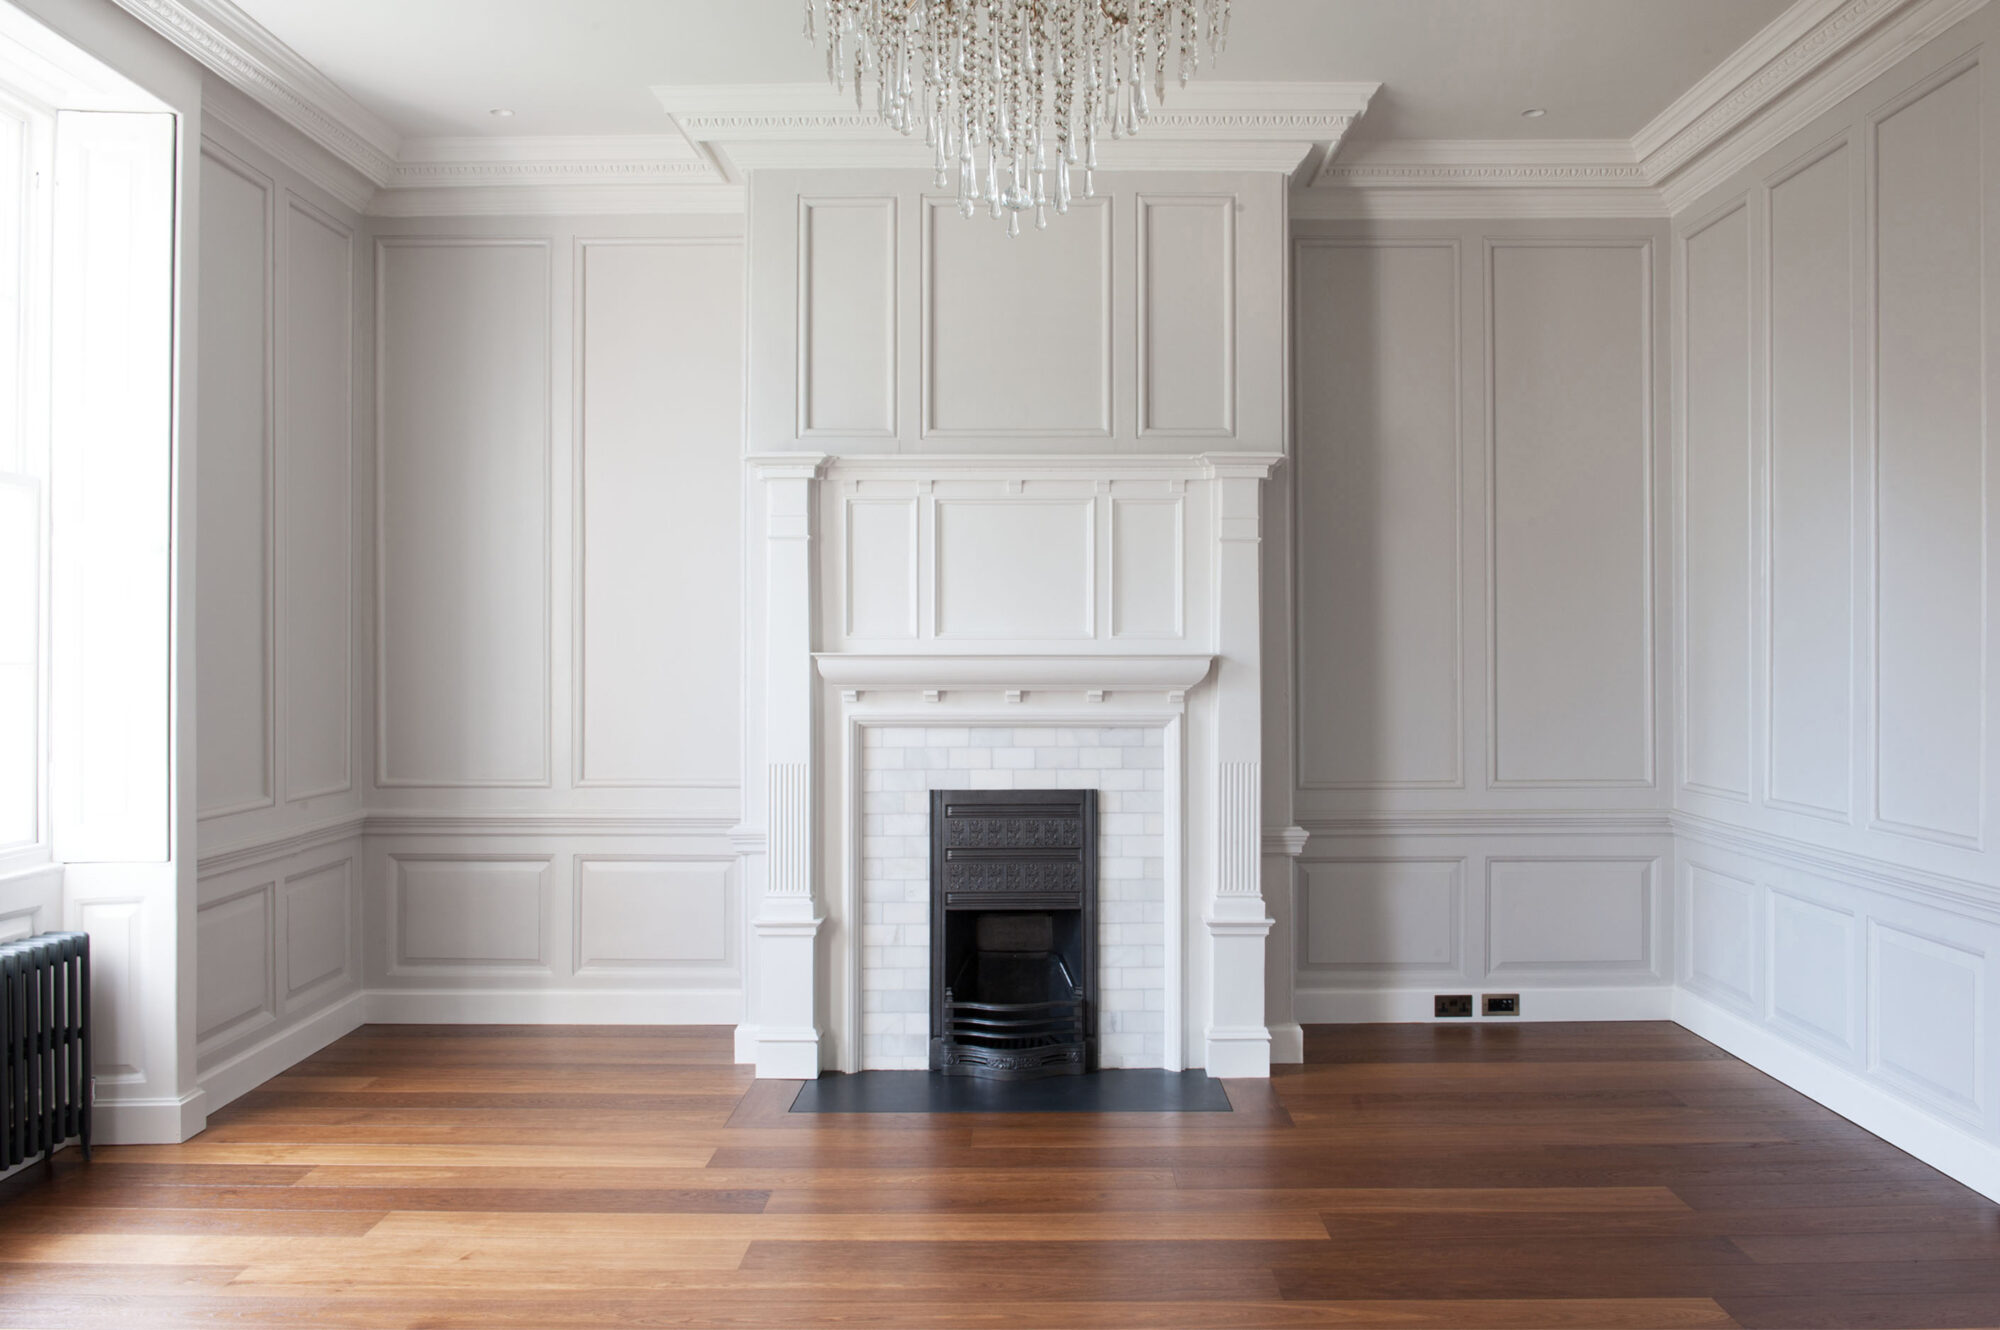 Oak landmark tatton planks in panelled room with marble fireplace and chandelier